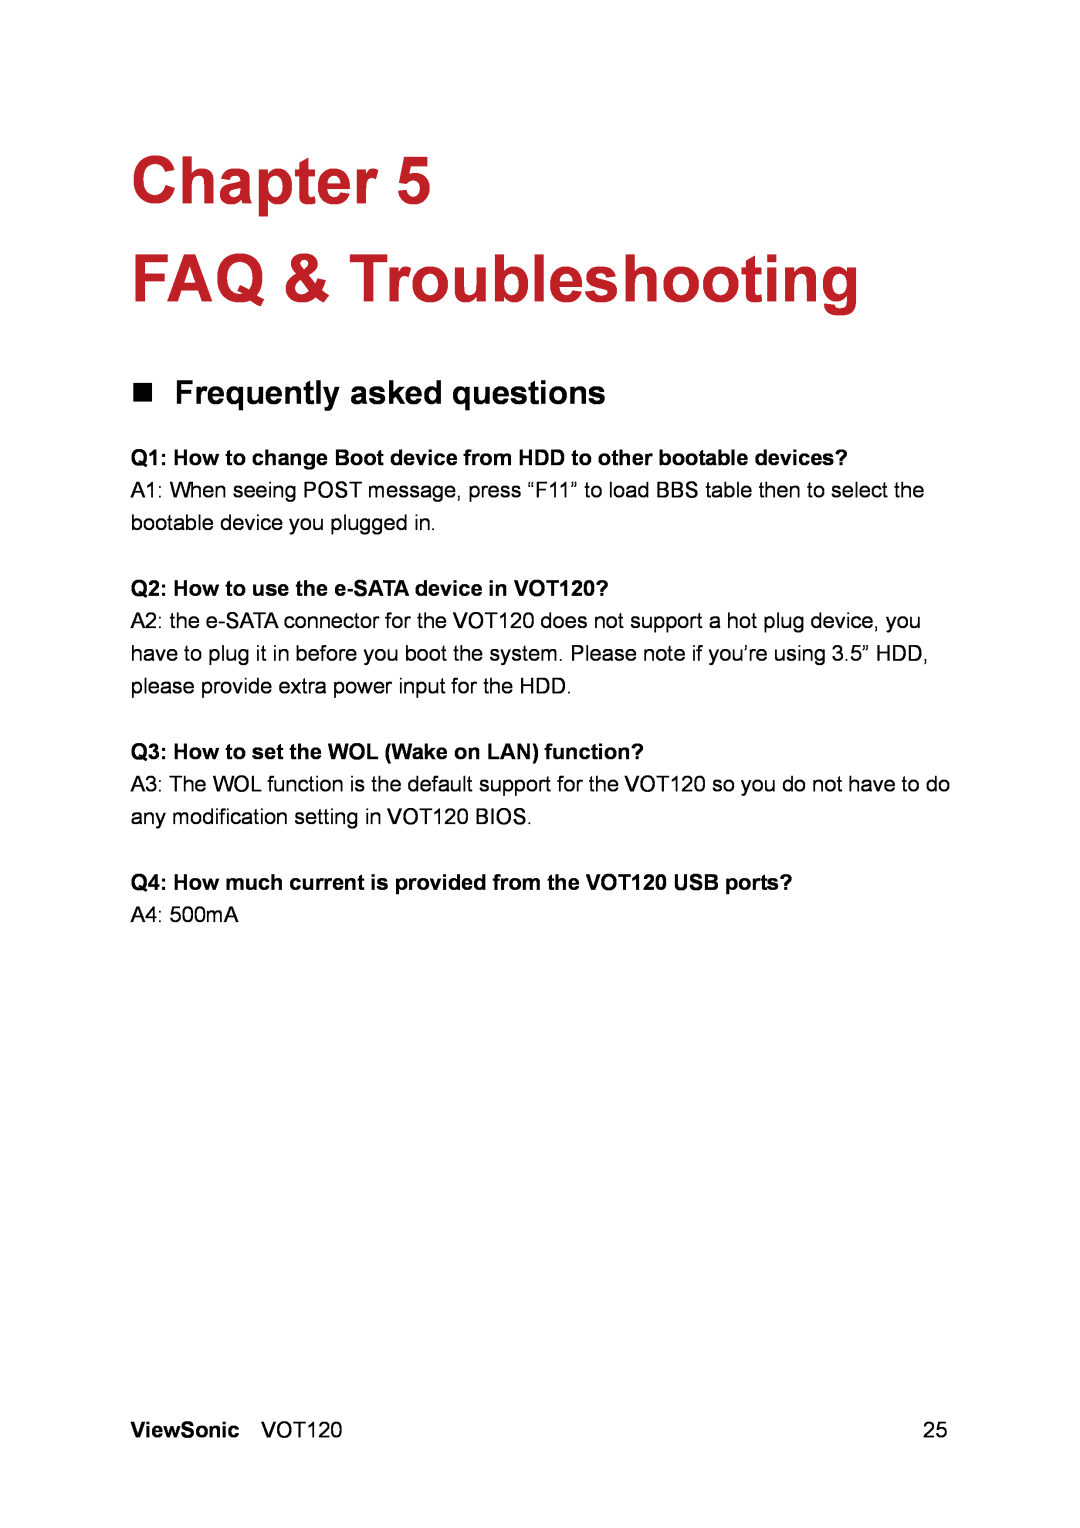 ViewSonic VS12869 Chapter FAQ & Troubleshooting, „ Frequently asked questions, Q2 How to use the e-SATA device in VOT120? 